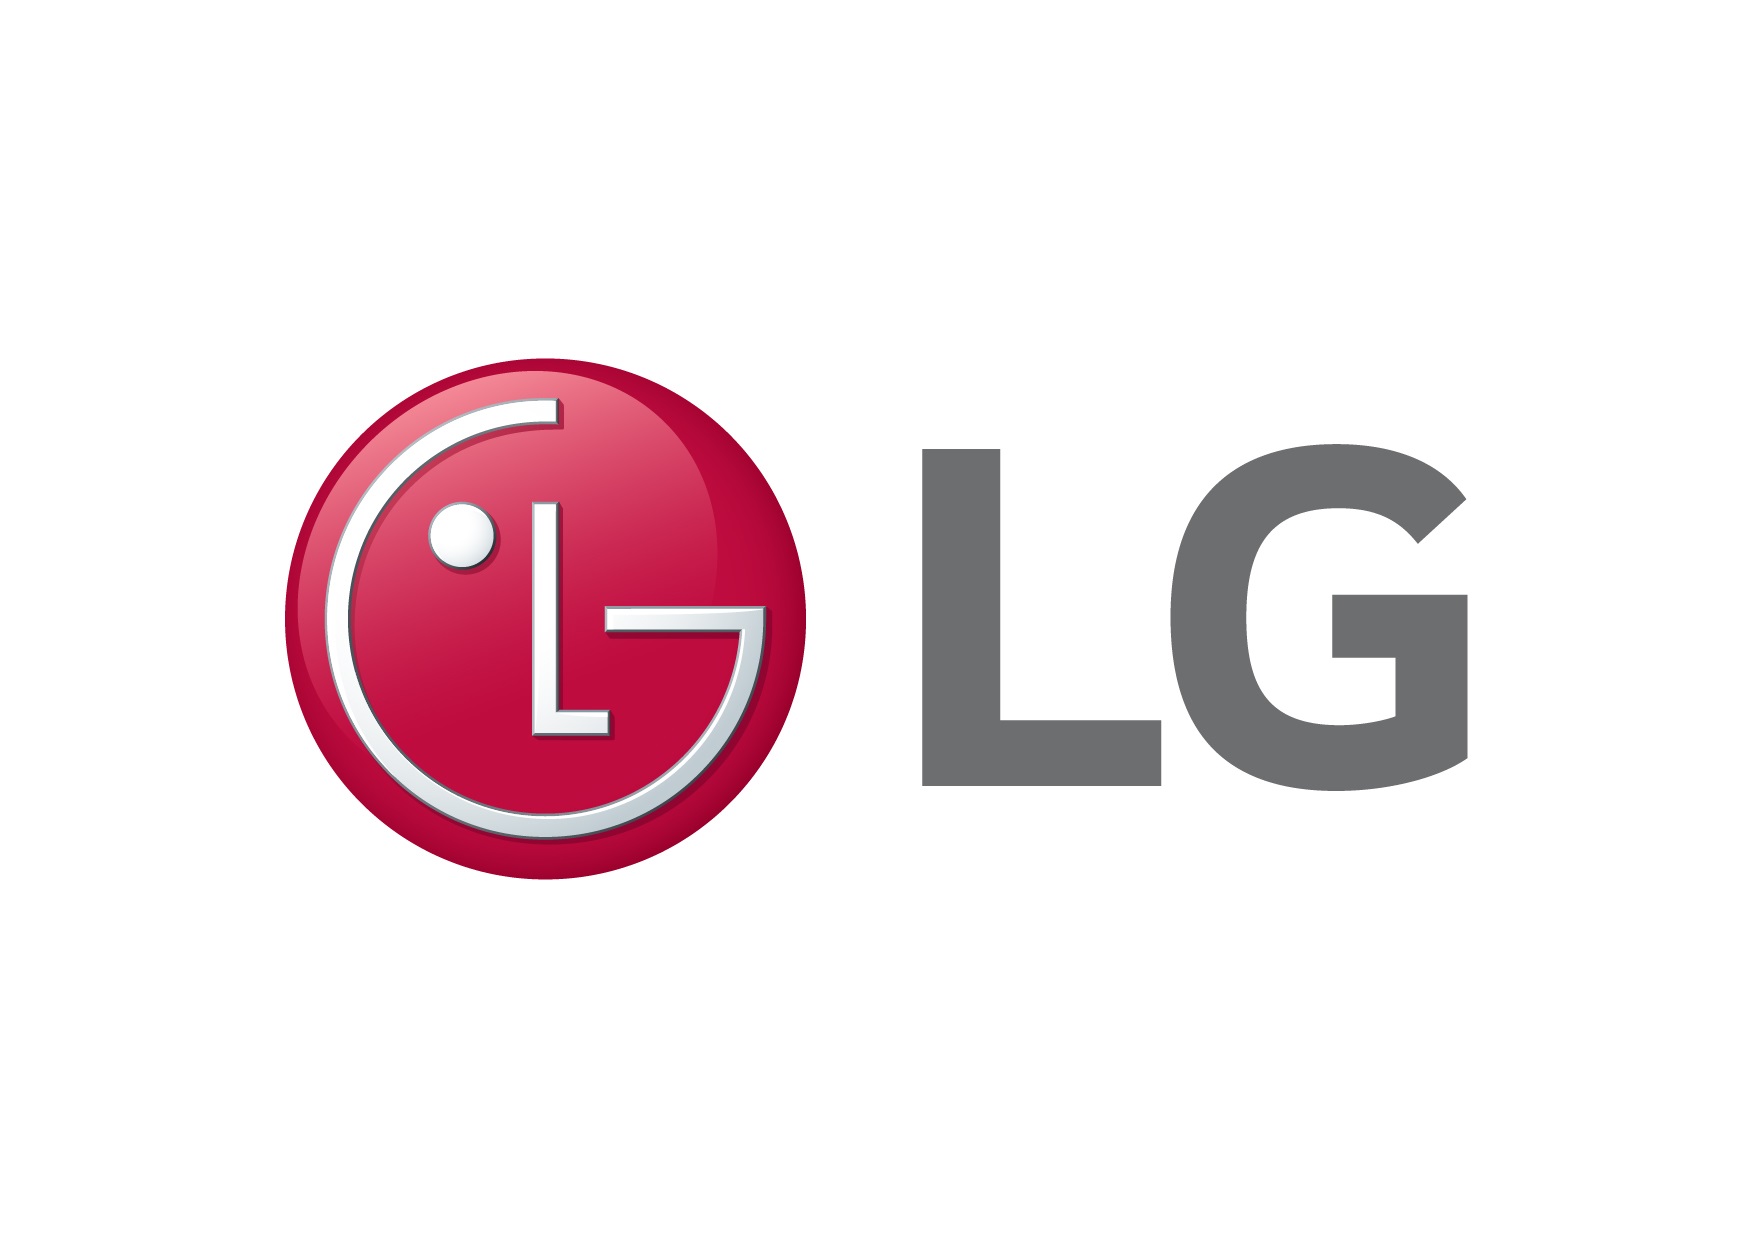 LG Sets New Record, Successfully Transmitting, Receiving 6G THz Data Over Distance of 500 Meters